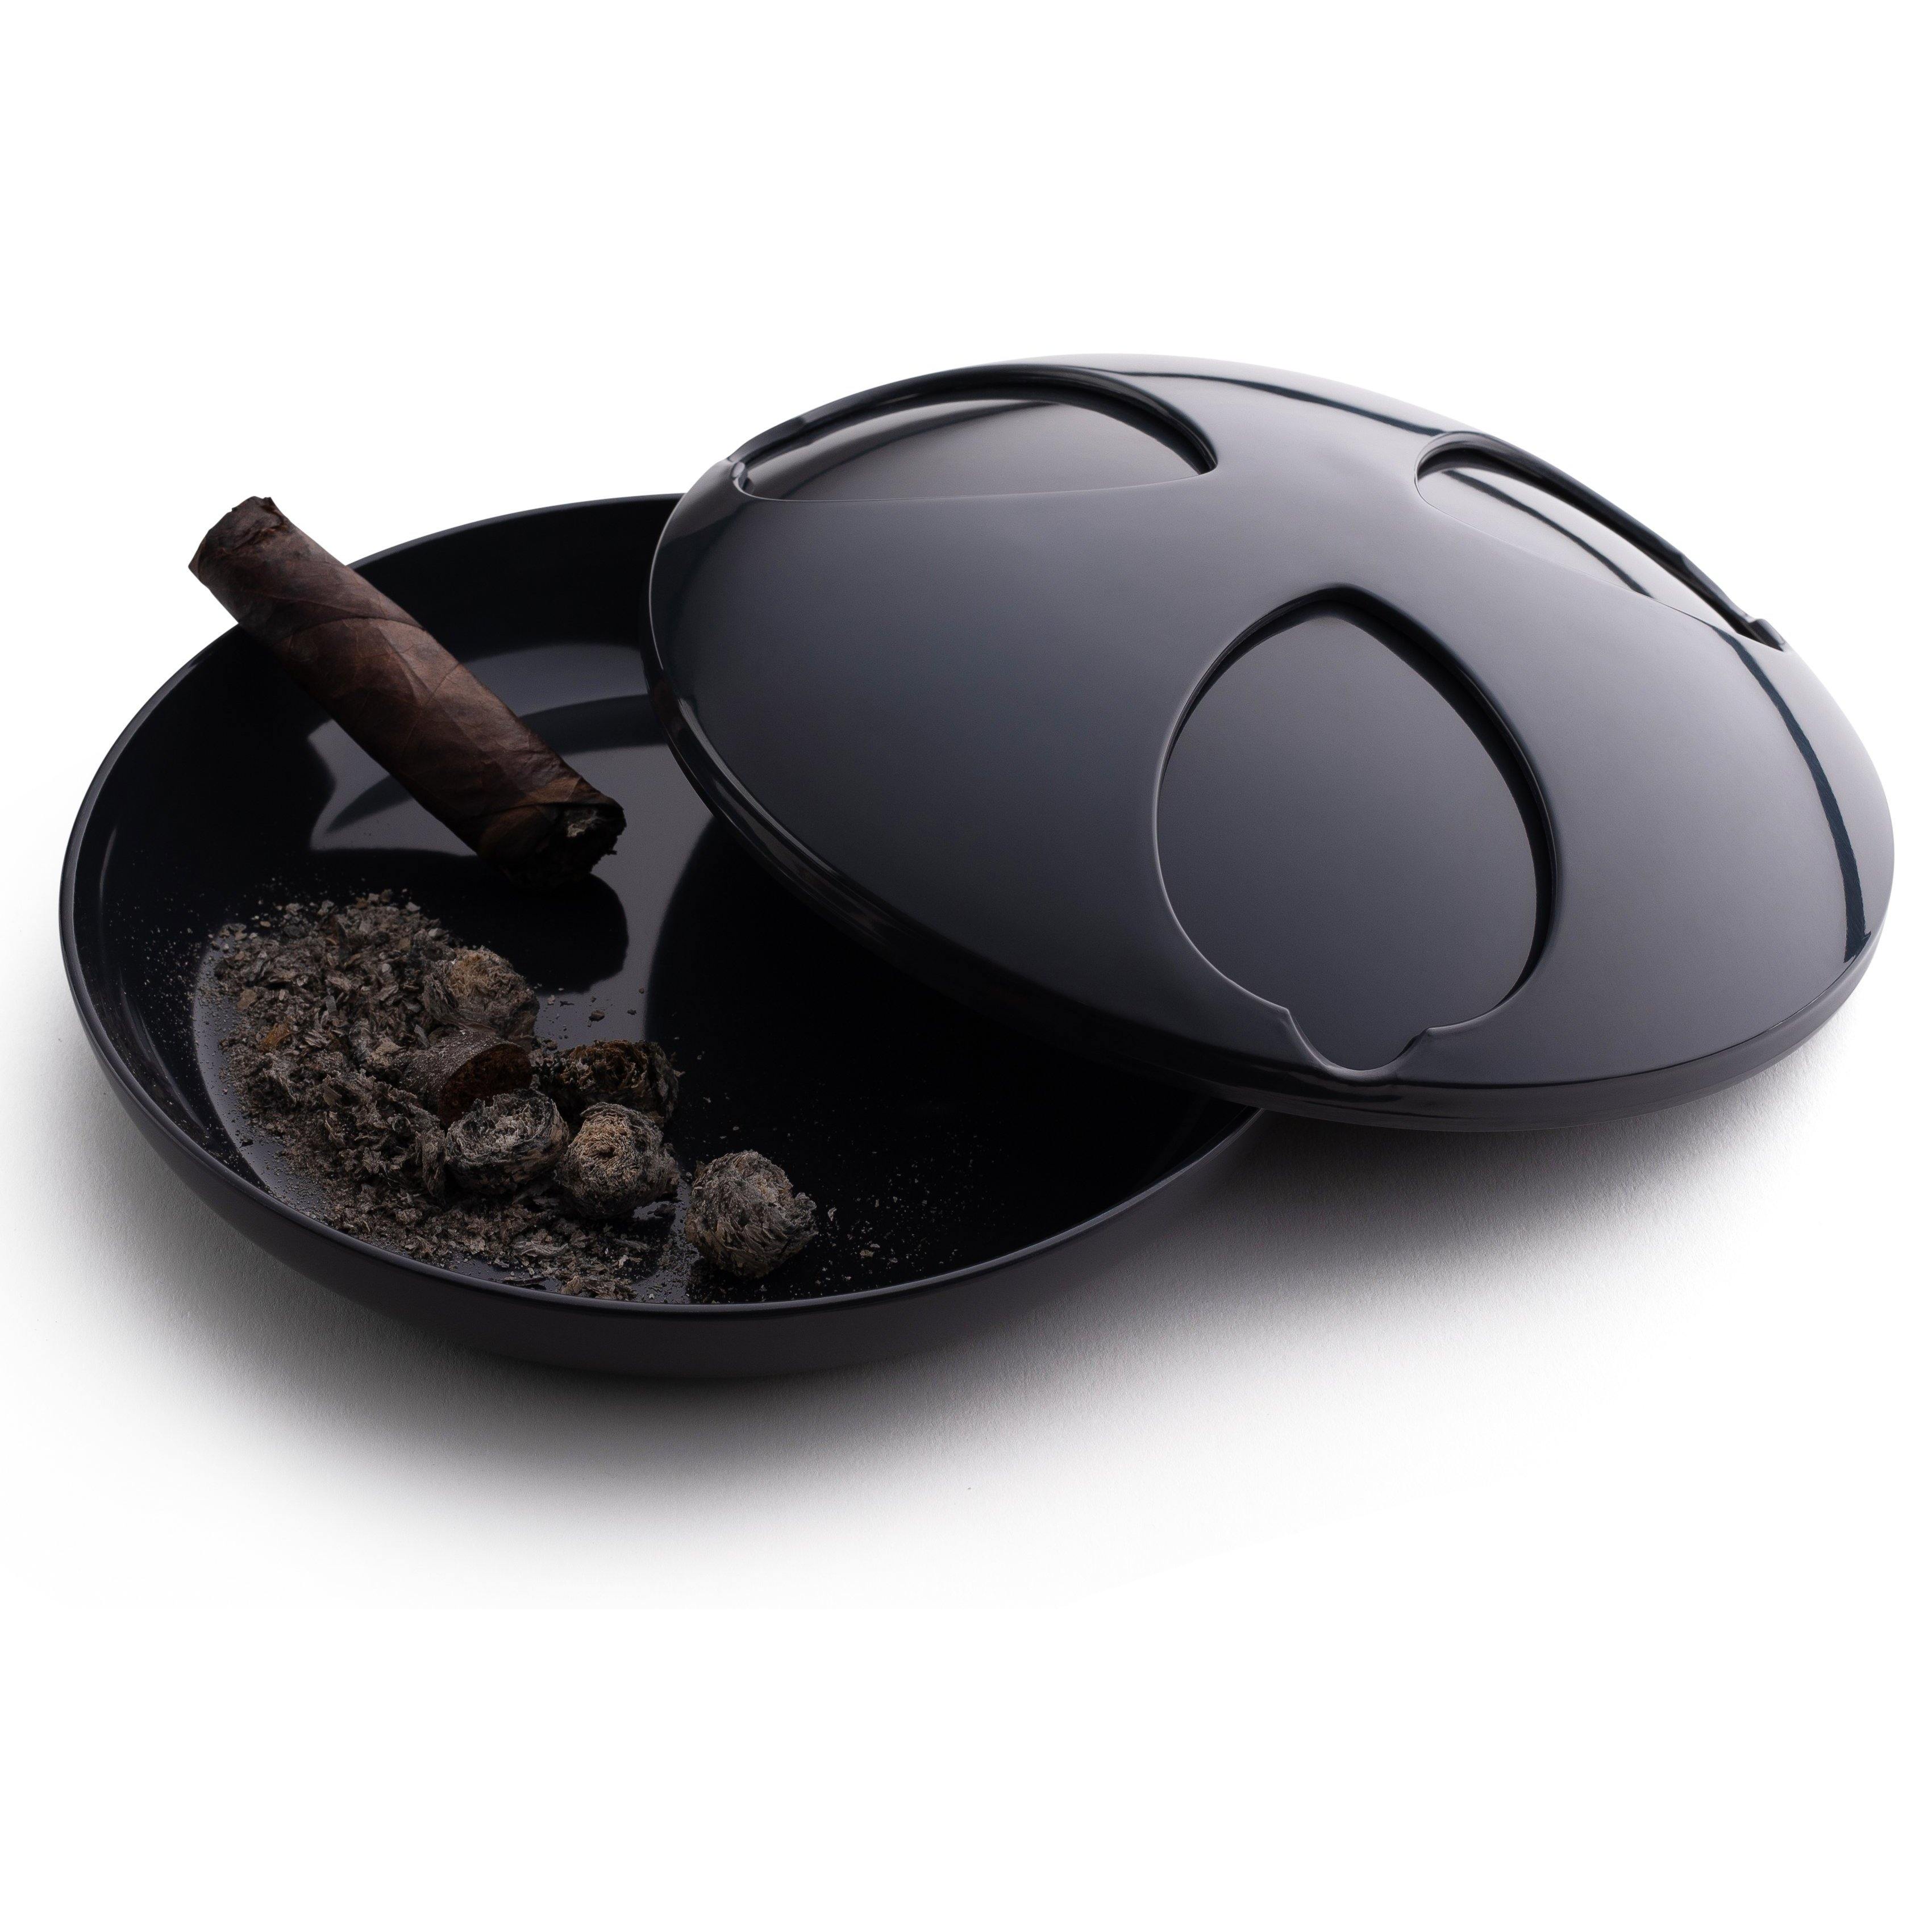 Ash-stay Sealing Wind & Odor Resistant Indoor/Outdoor Cigar Ashtray - Ashstay: Seals in Odors and Ash - Perfect for The Patio or Boat or Indoors T